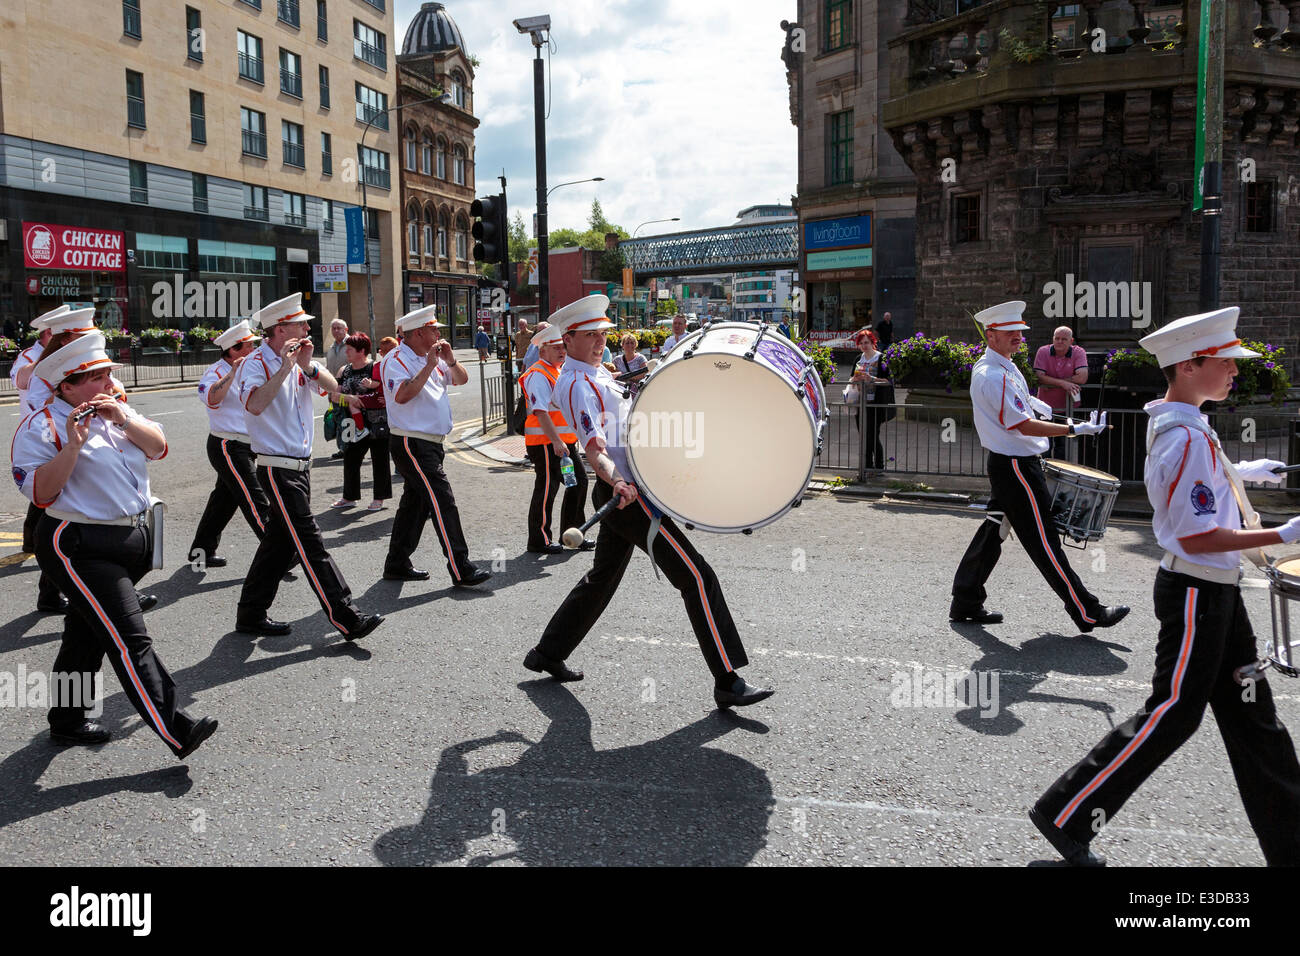 Man playing the bass drum, taking part in an Orange Walk parade through the streets of Glasgow, Scotland, UK Stock Photo